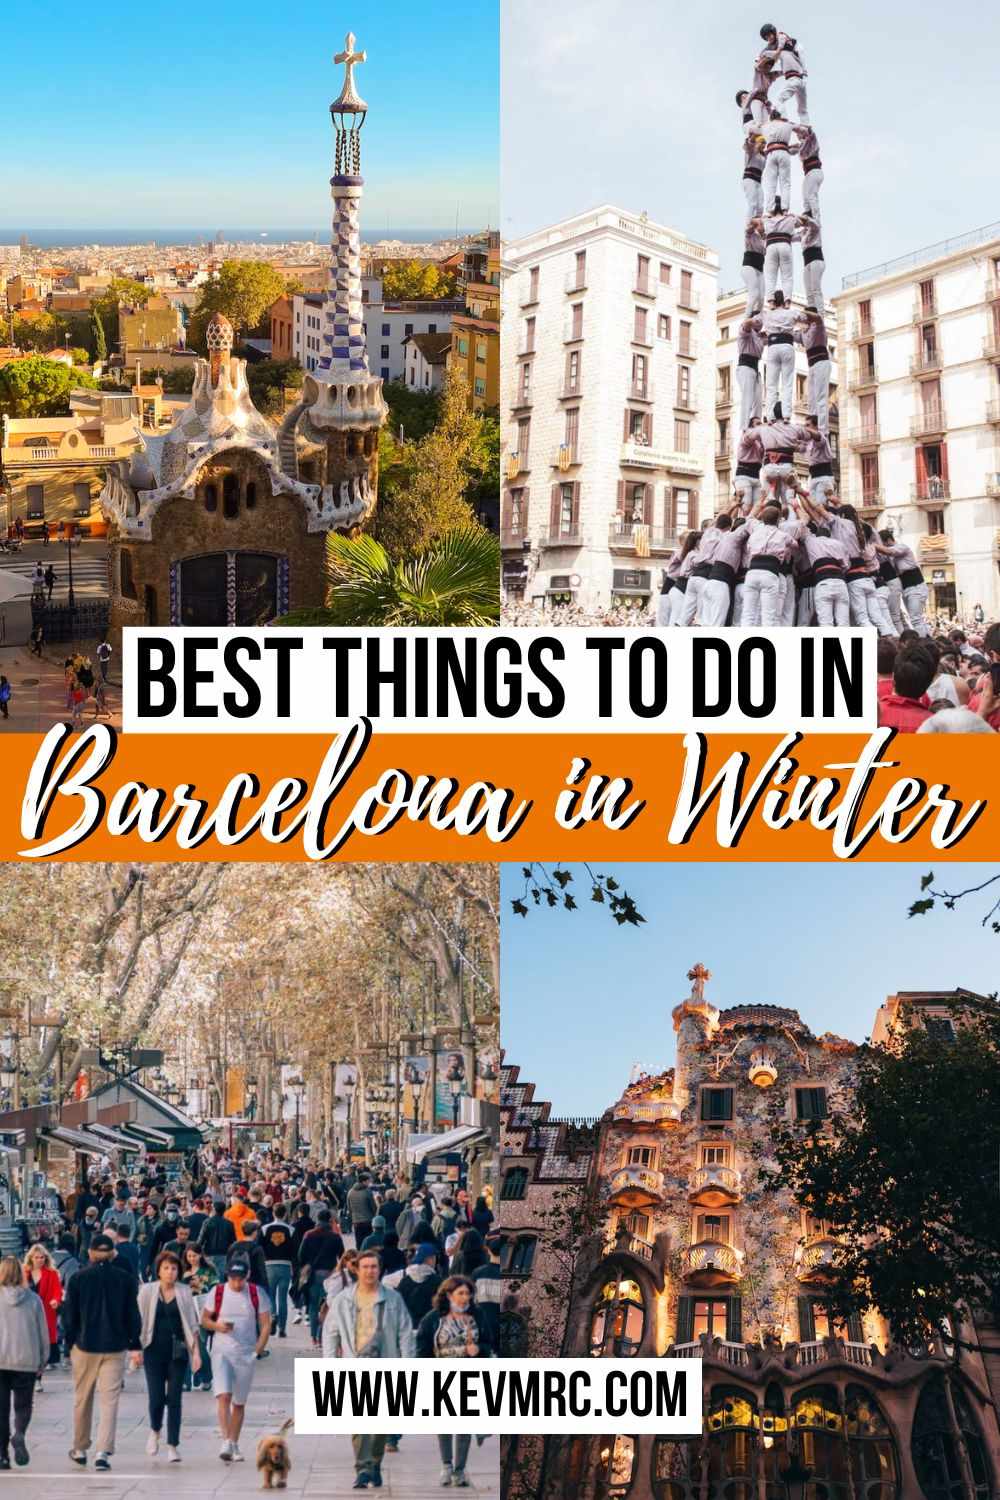 Wondering what to do in Barcelona in winter? Find out in this guide all the best things to do in Barcelona in winter, along with travel tips, weather info and more. barcelona spain travel guide | barcelona spain travel tips | things to do in barcelona spain travel | what to do in barcelona spain | top things to do in barcelona spain | things to do in barcelona spain during christmas #barcelona